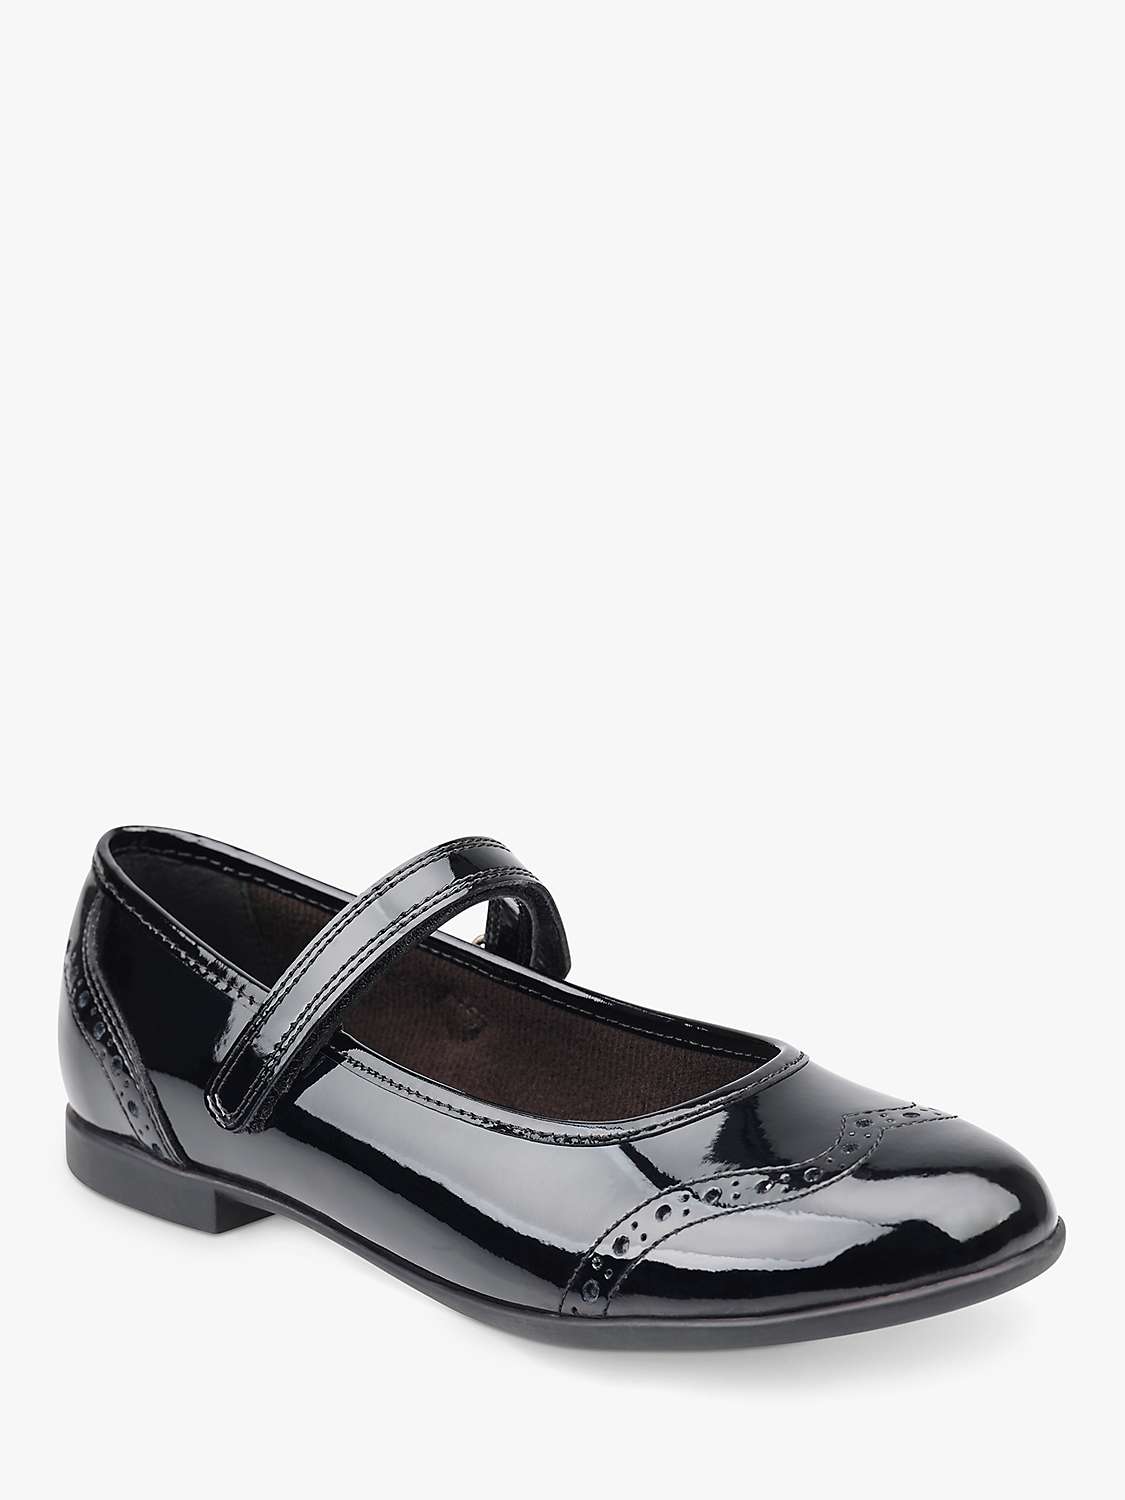 Buy Start-Rite Kids' Impress Patent Leather Shoes Online at johnlewis.com